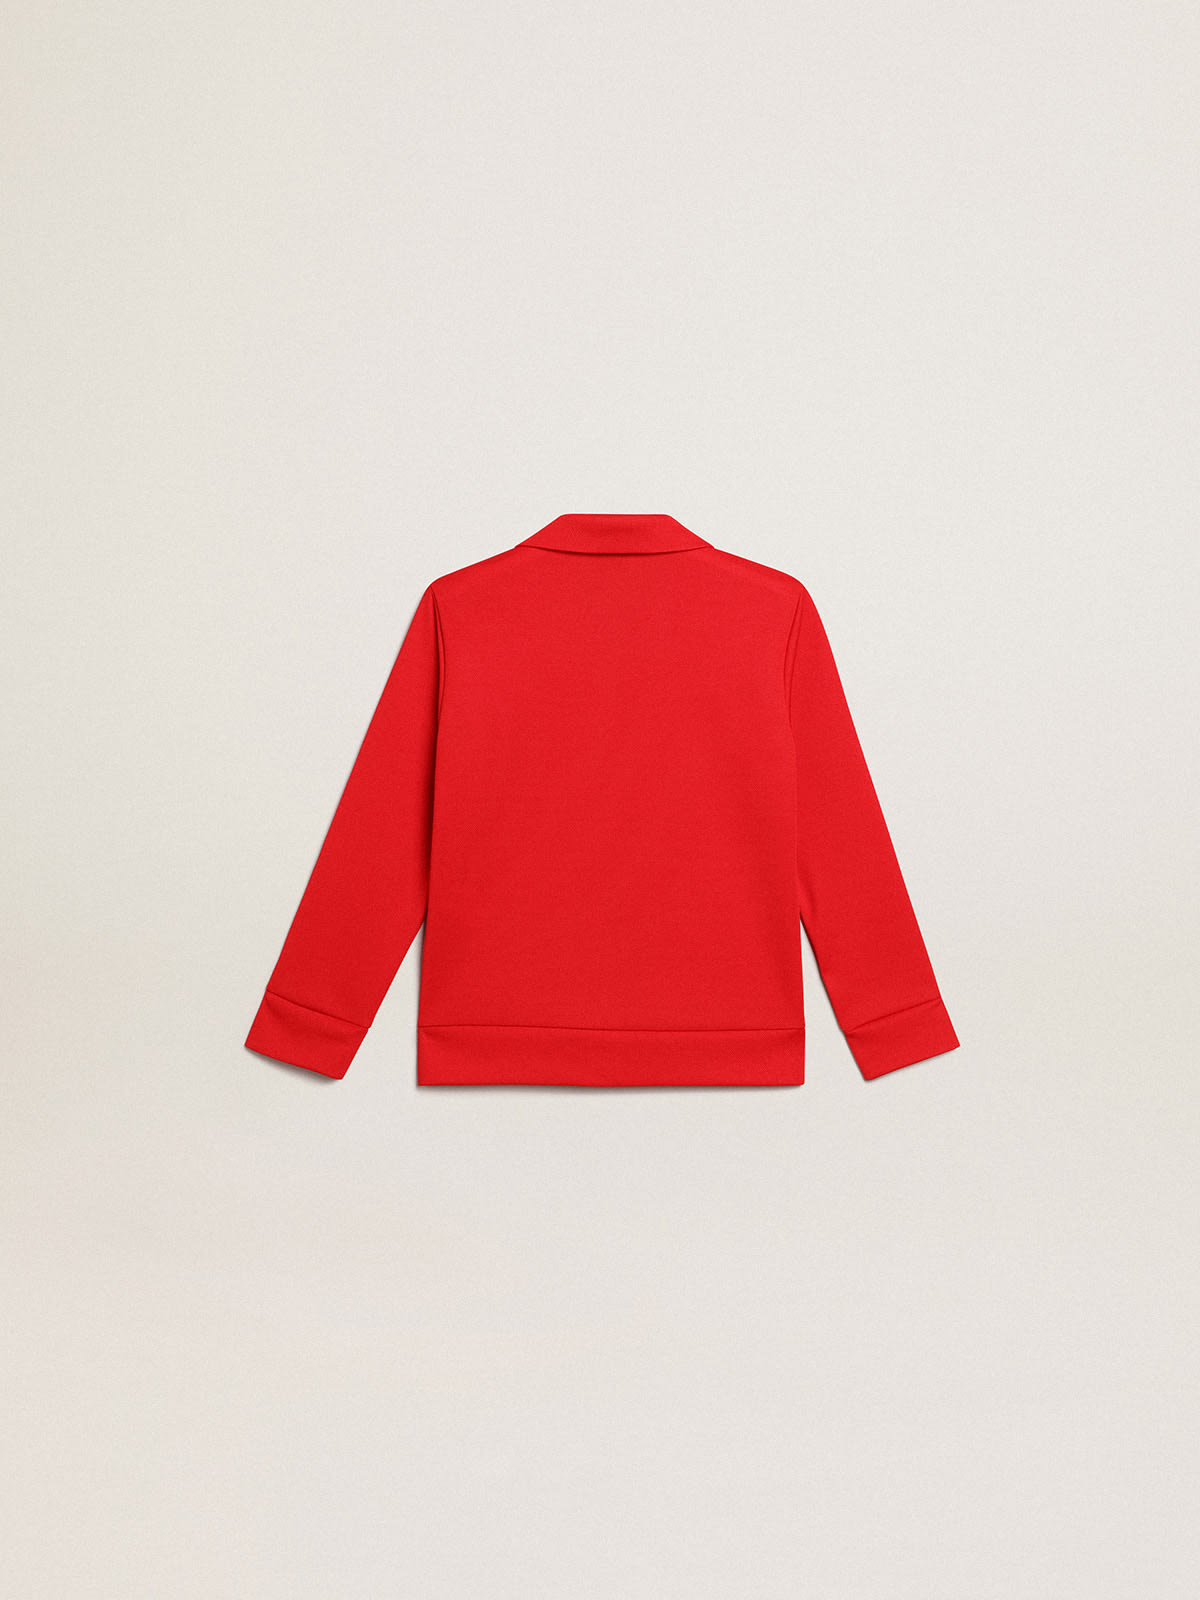 Golden Goose - Red zipped sweatshirt with white stripe and red stars in 